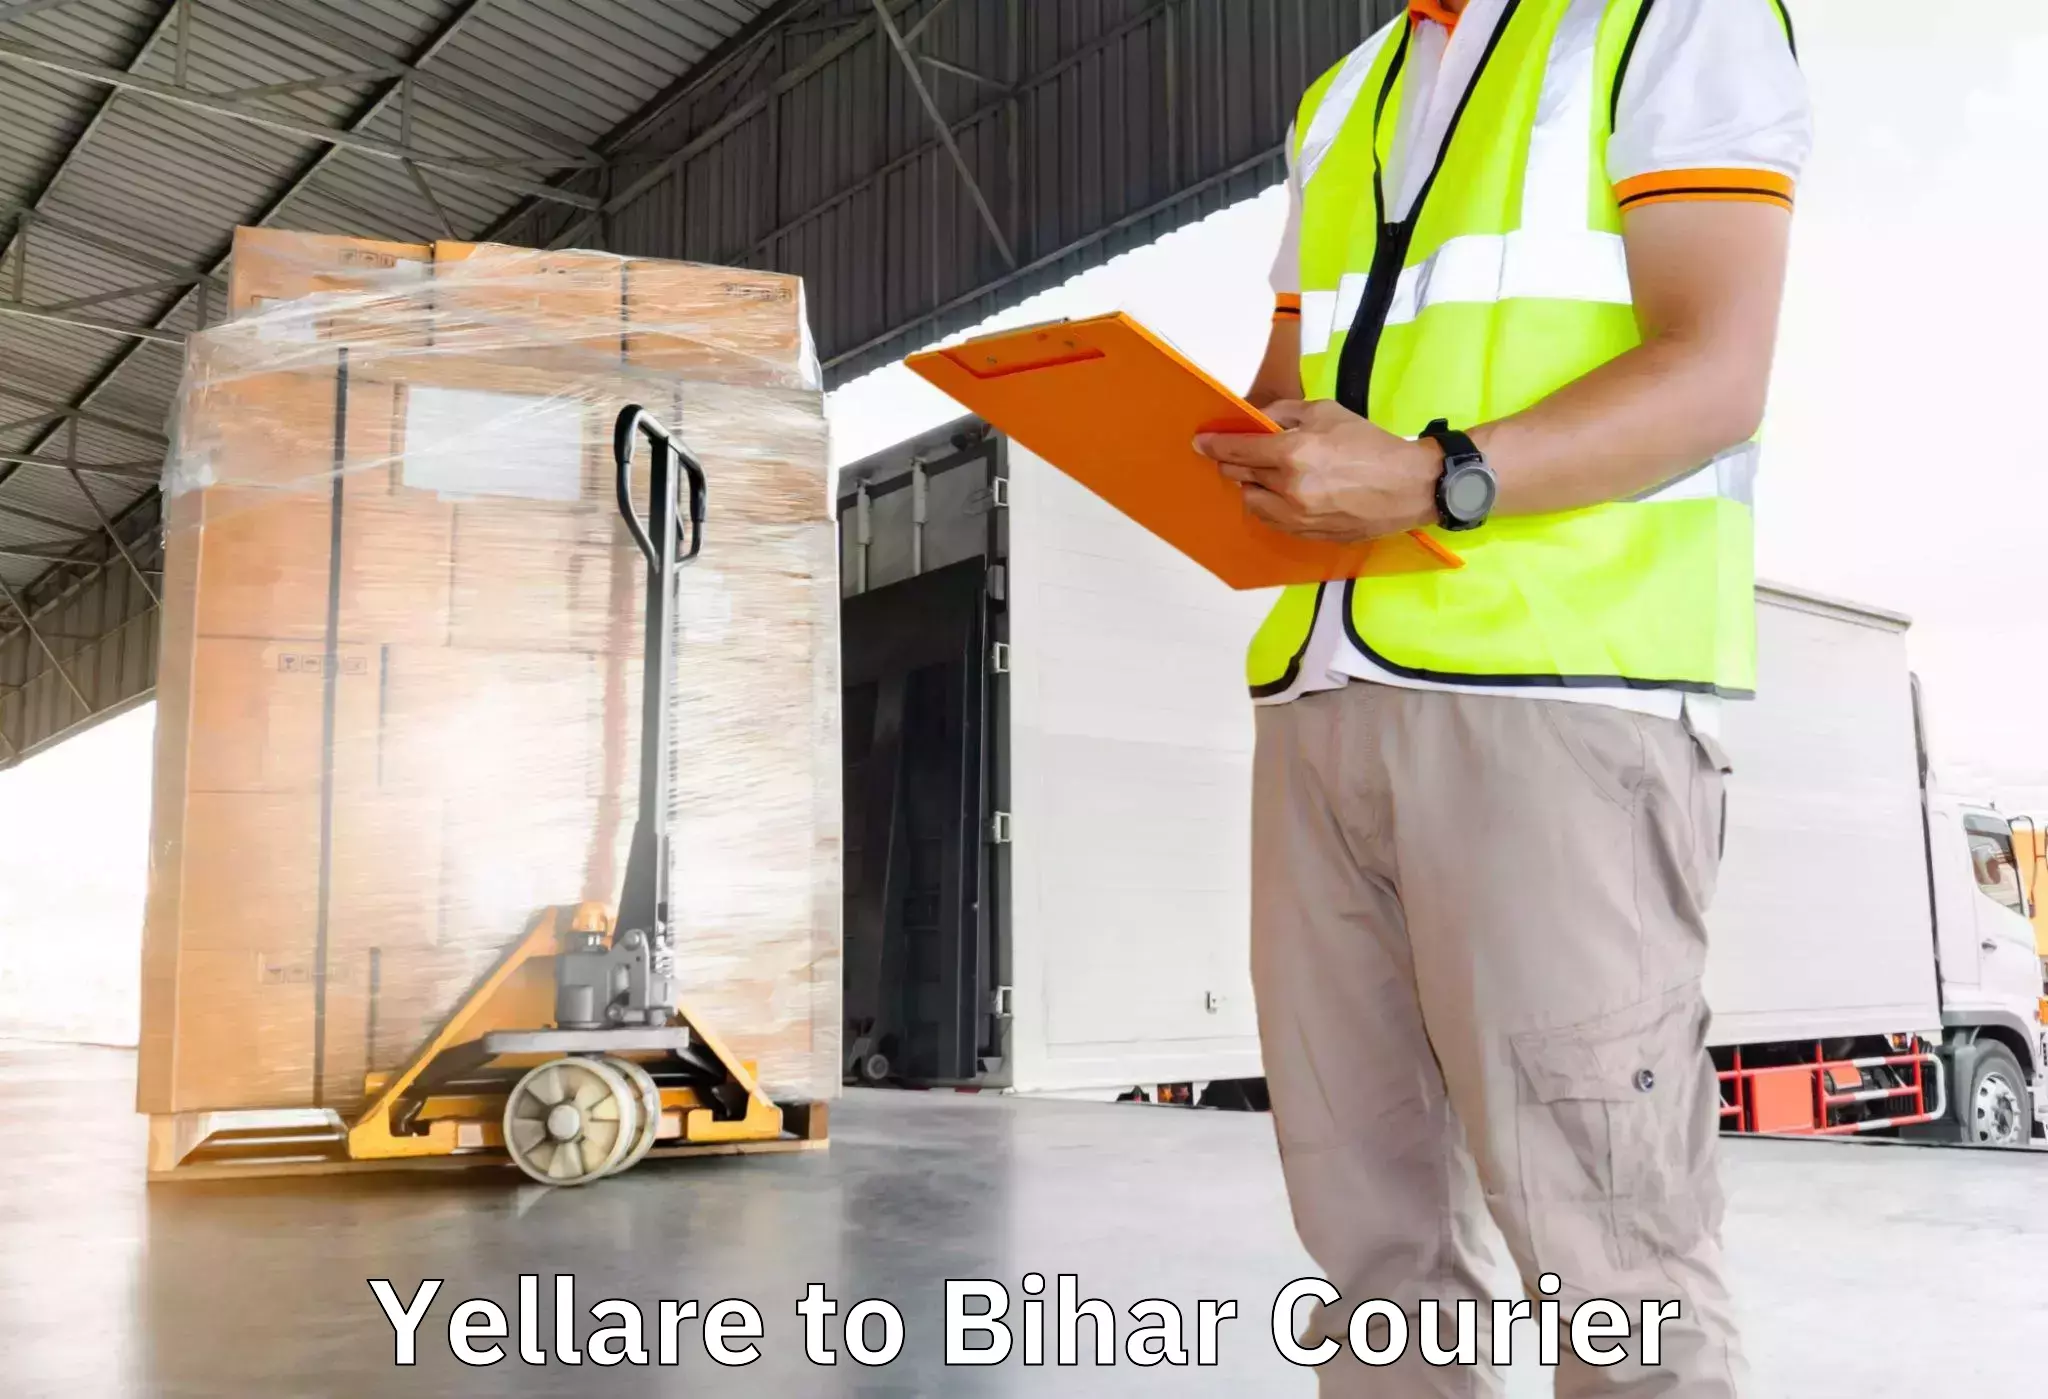 Moving and storage services Yellare to Bihta